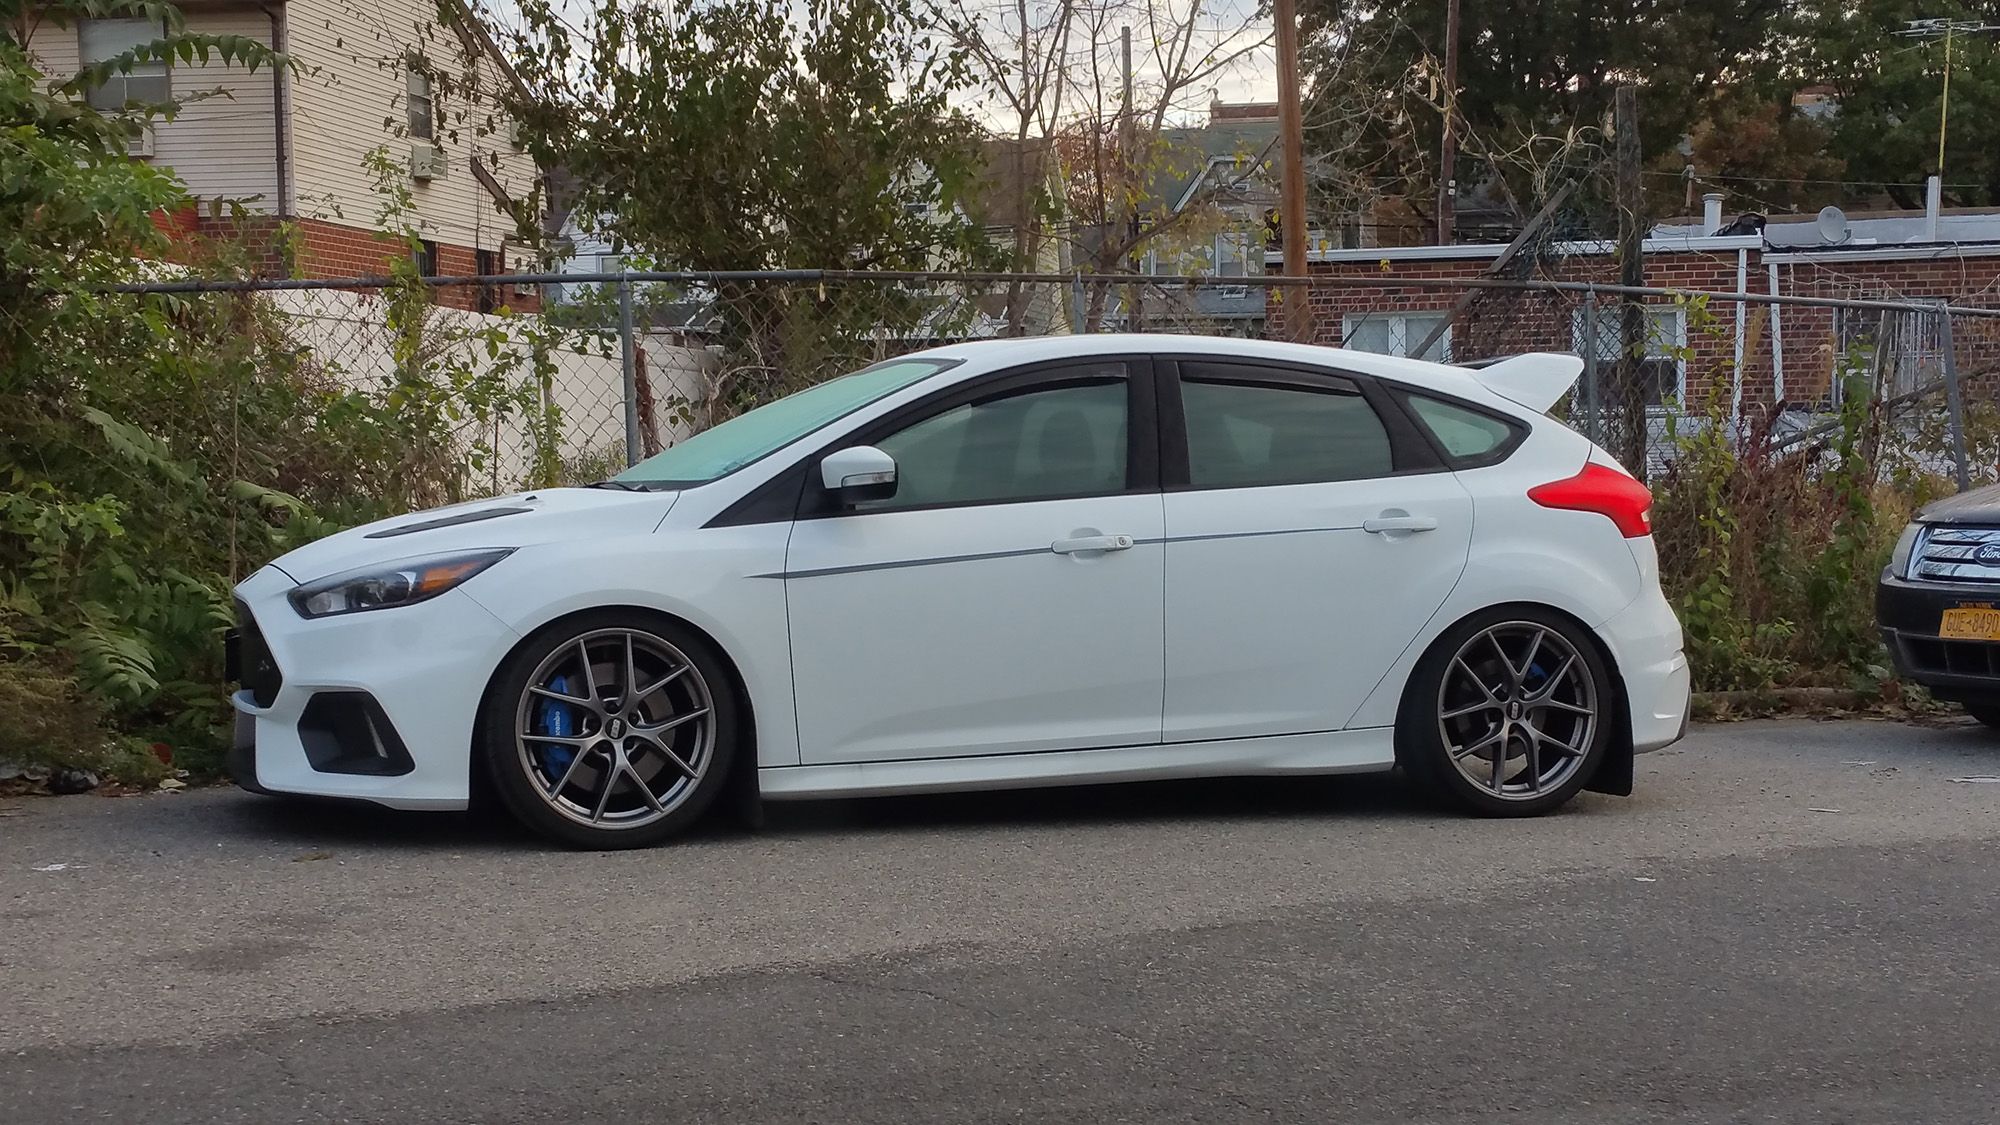 Ford Focus Rs Mk3 White s Ci R Wheel Front